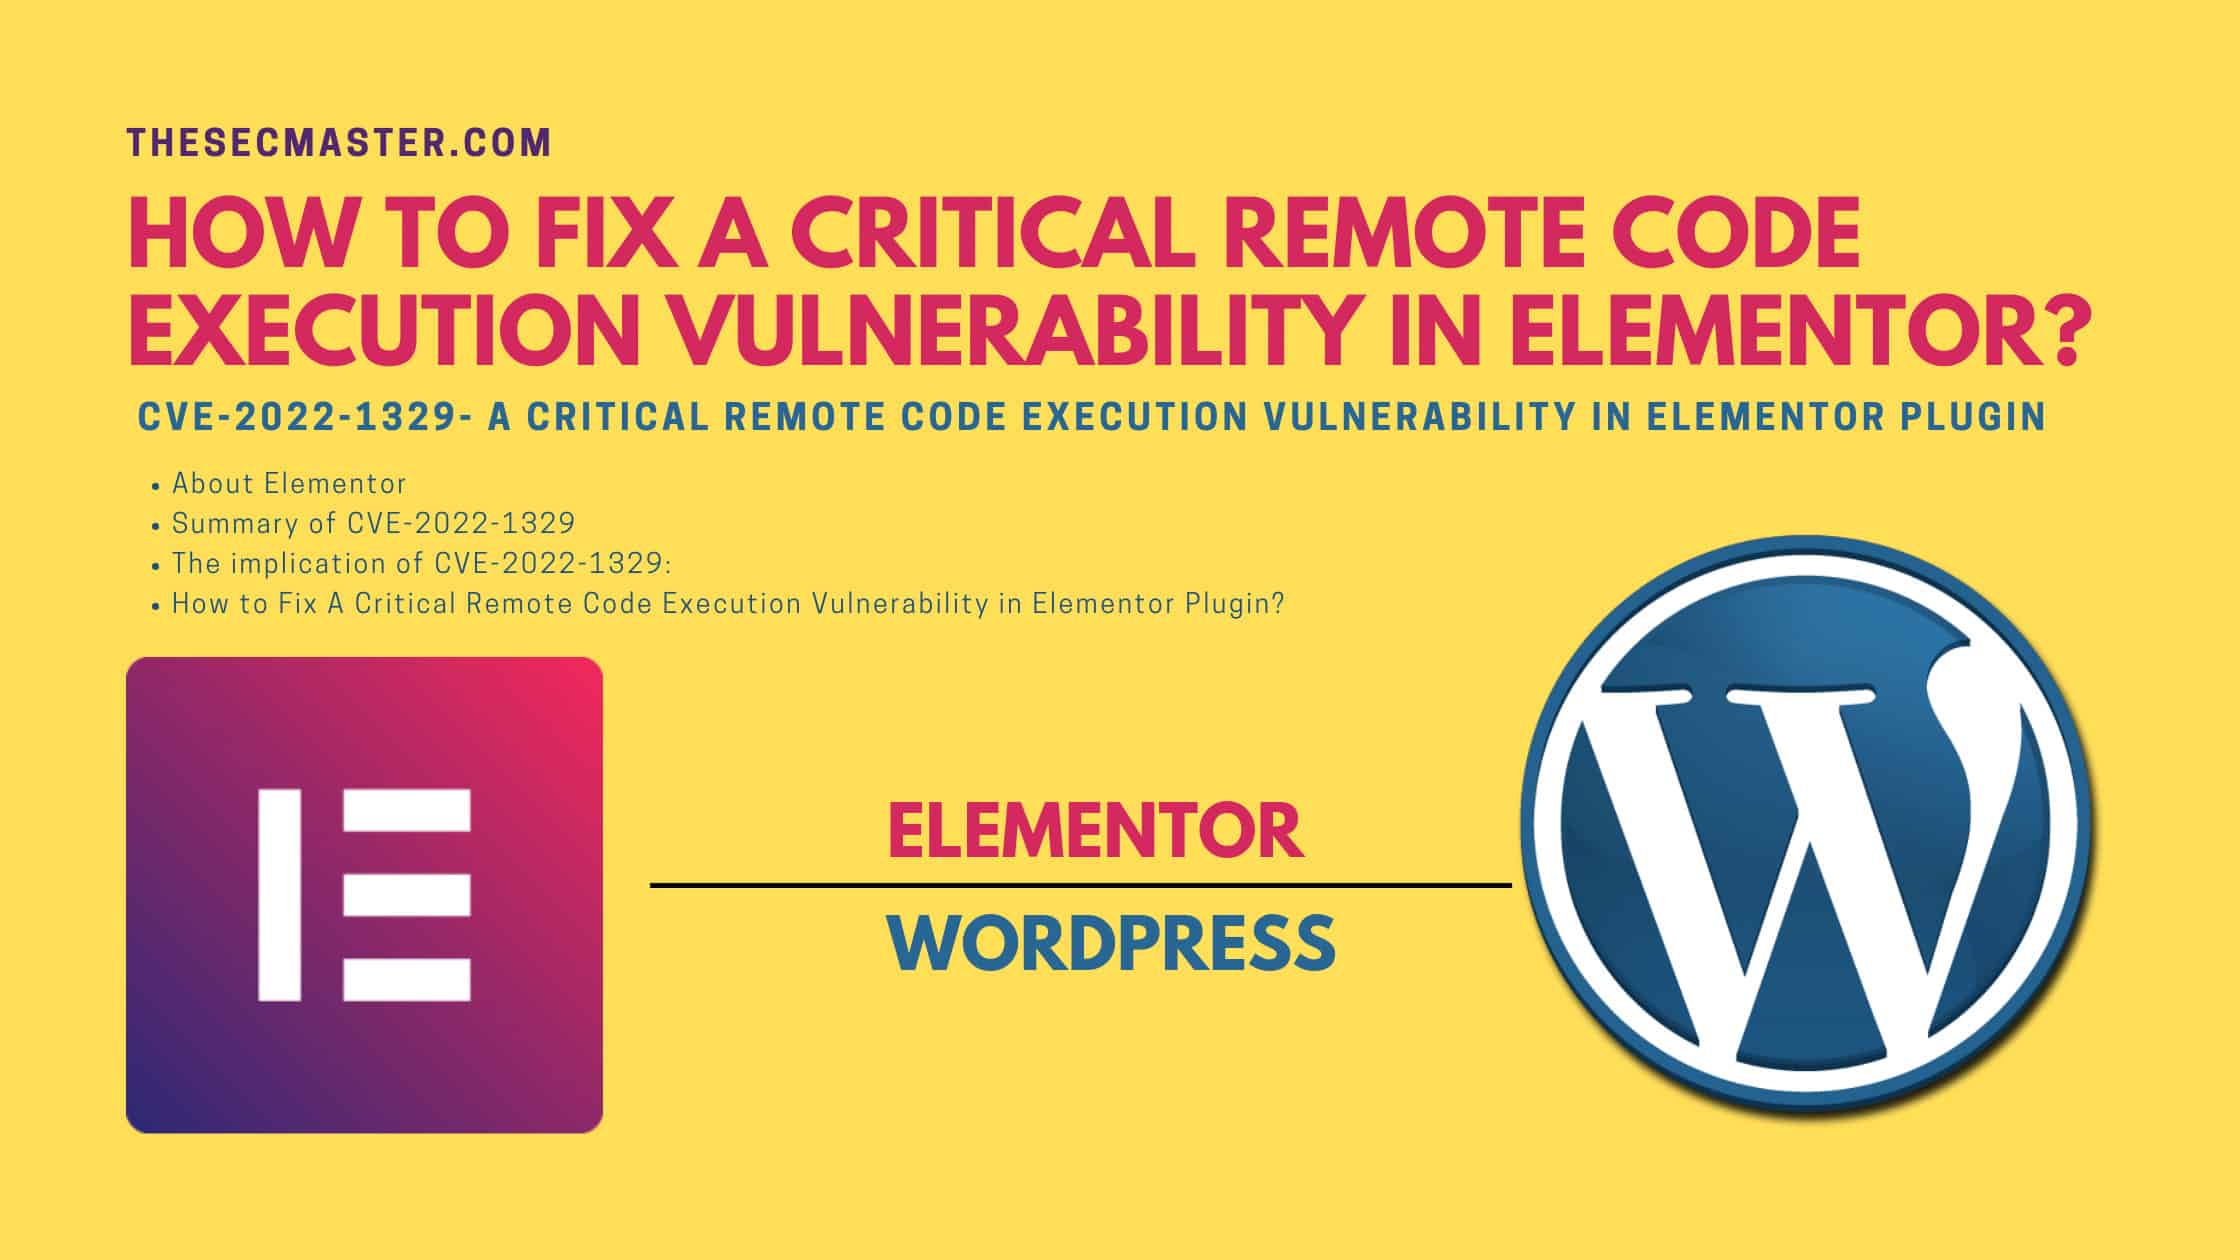 How To Fix A Critical Remote Code Execution Vulnerability In Elementor